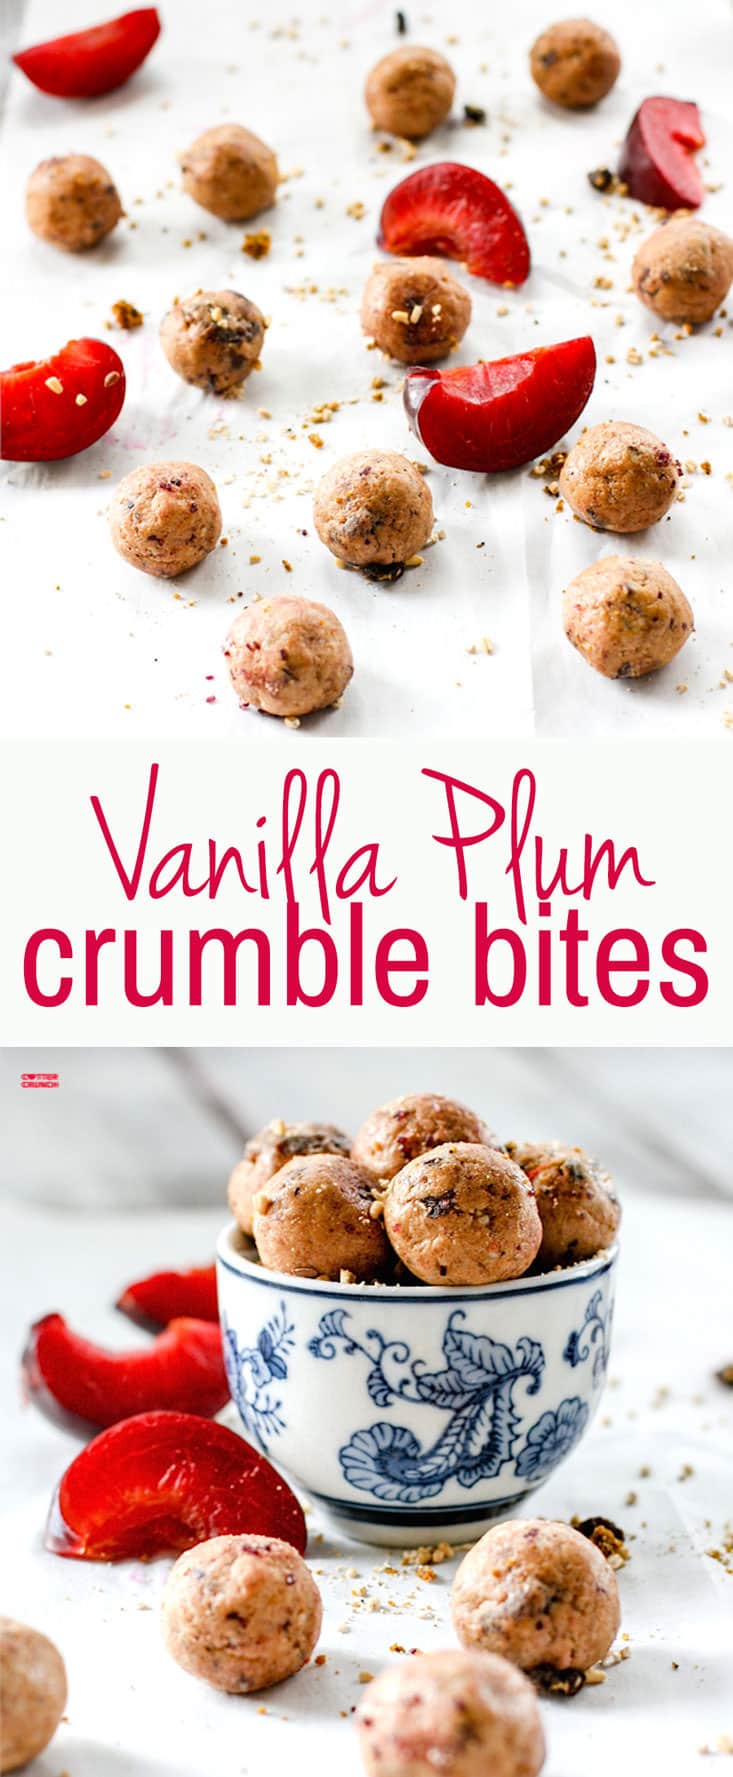 A one bite wonder! These gluten free no bake Vanilla Plum Crumble Bites wrap up all the flavors of that stone fruit summer dessert  into one delicious, healthy, gluten free protein bite. @cottercrunch